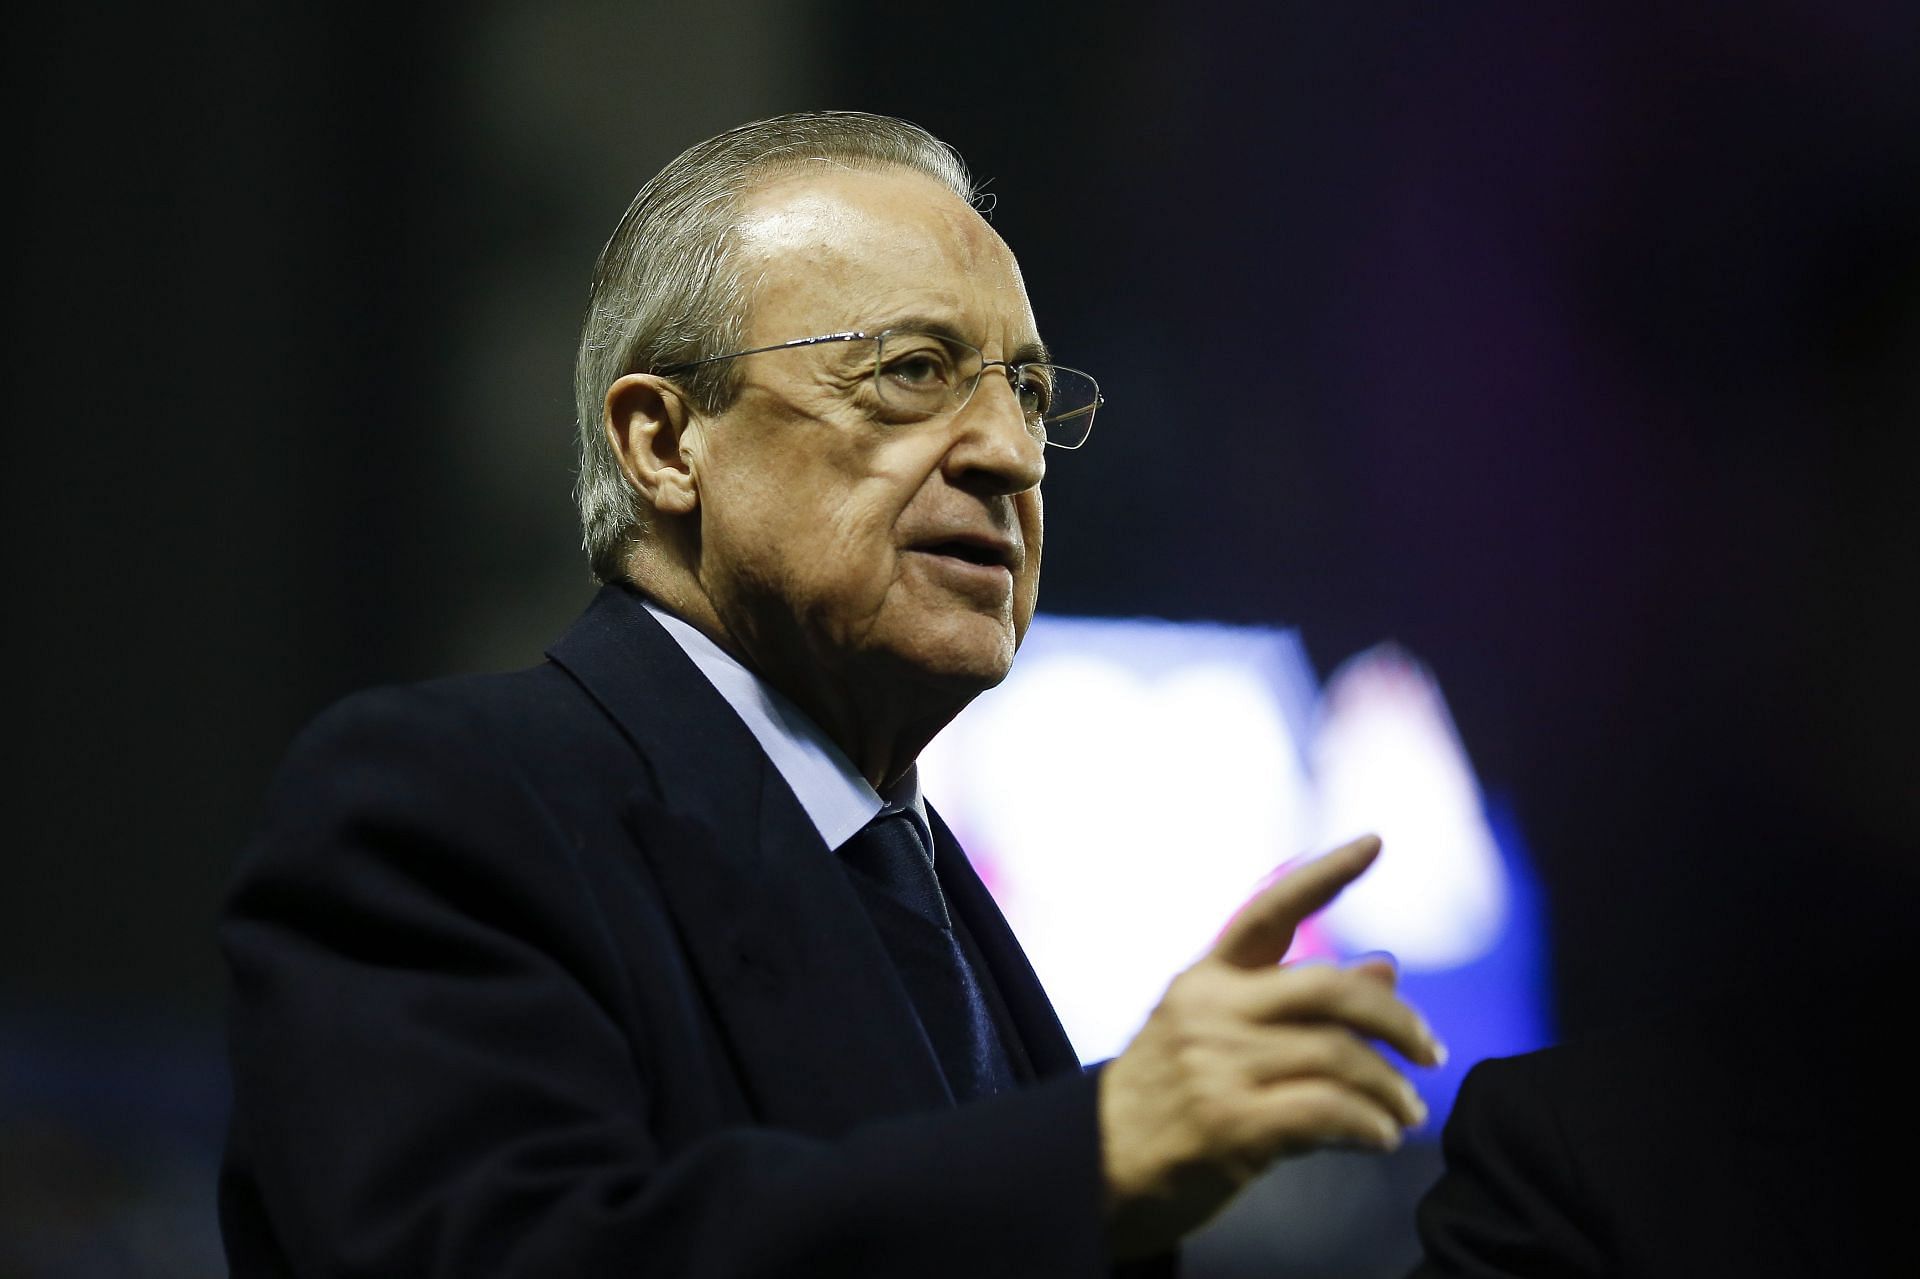 Florentino Perez has penned a letter to club members.